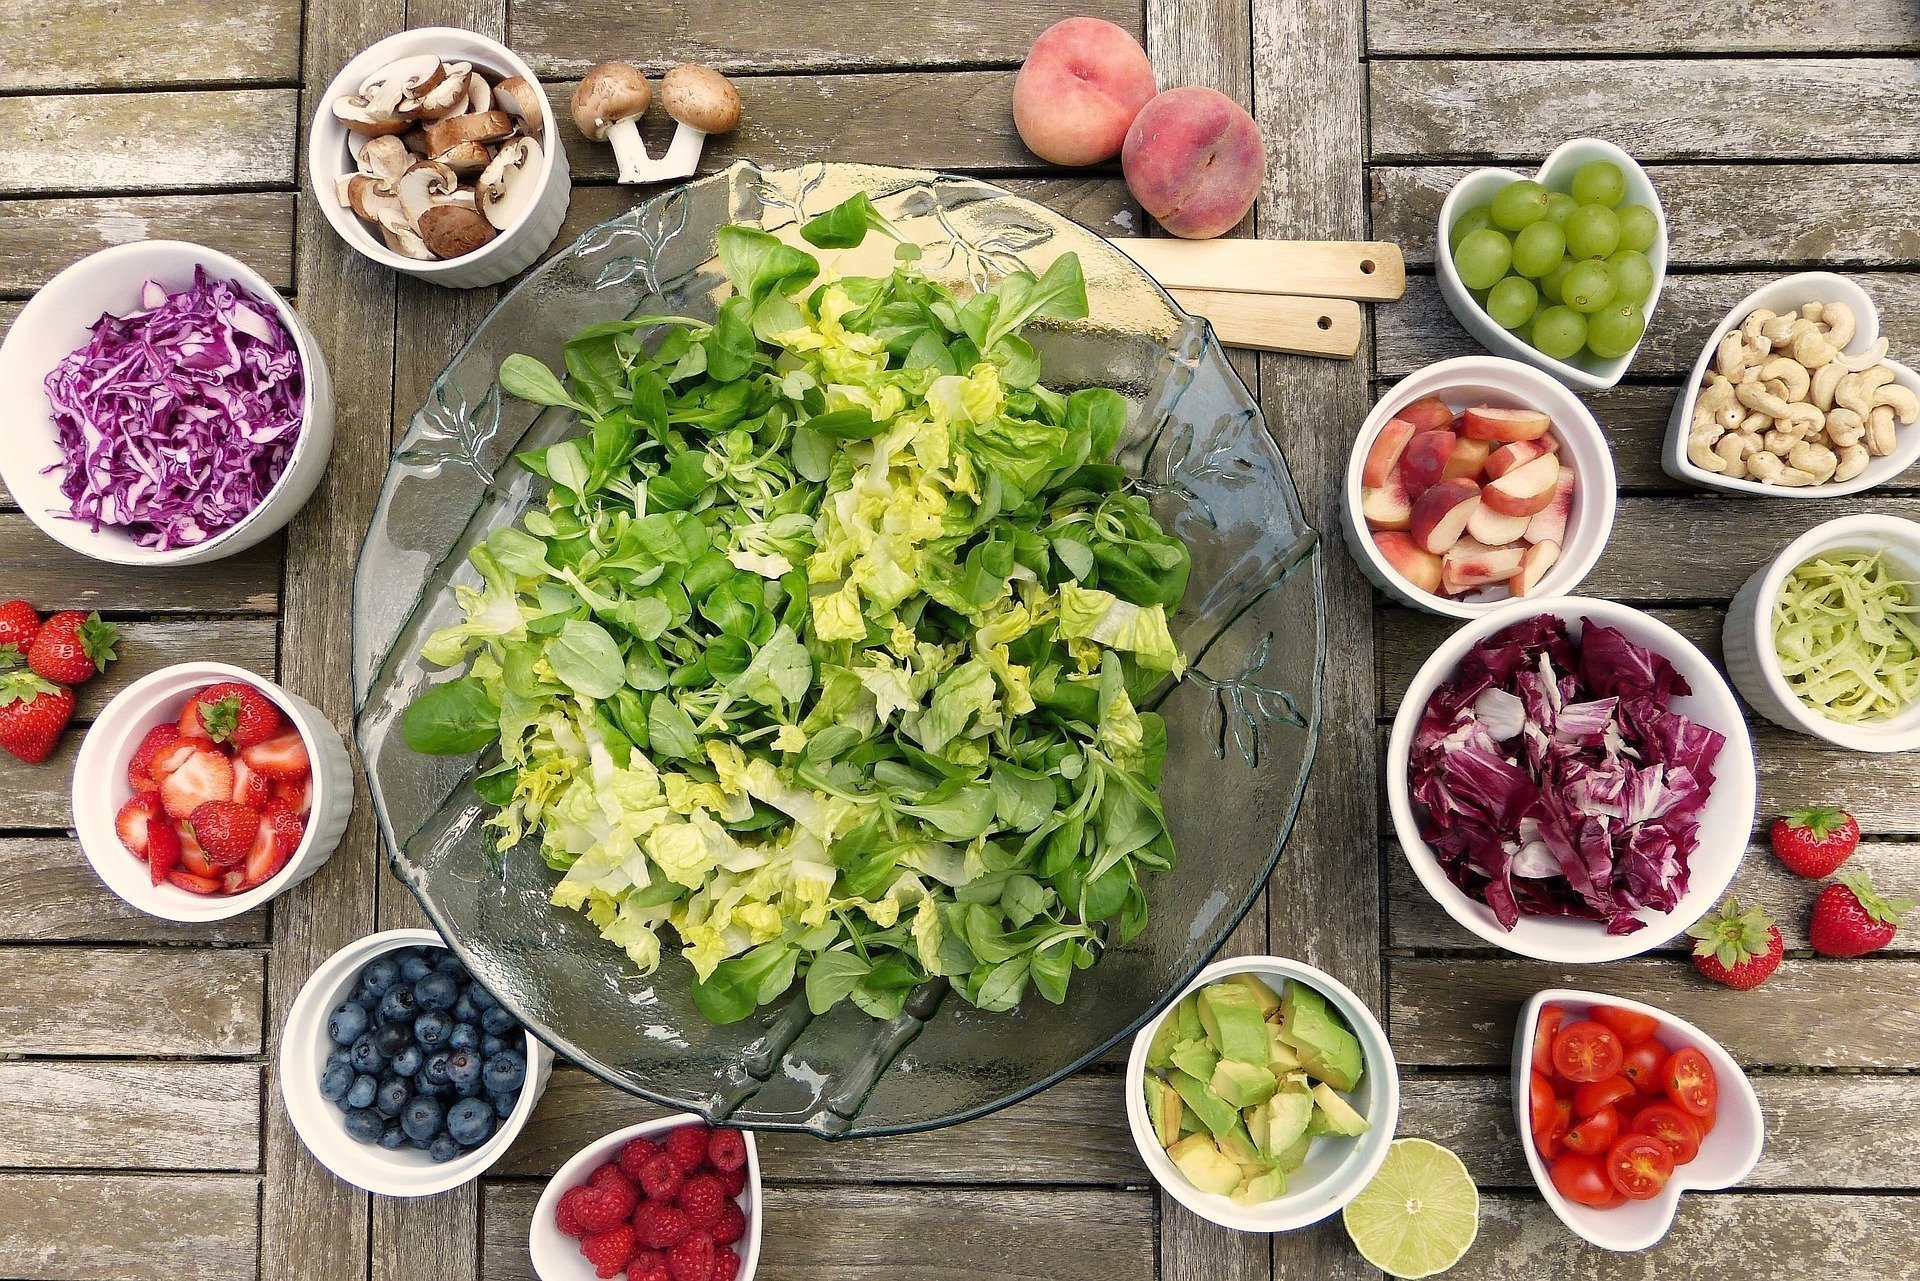 healthy salad and fruits presented in bowls on a table